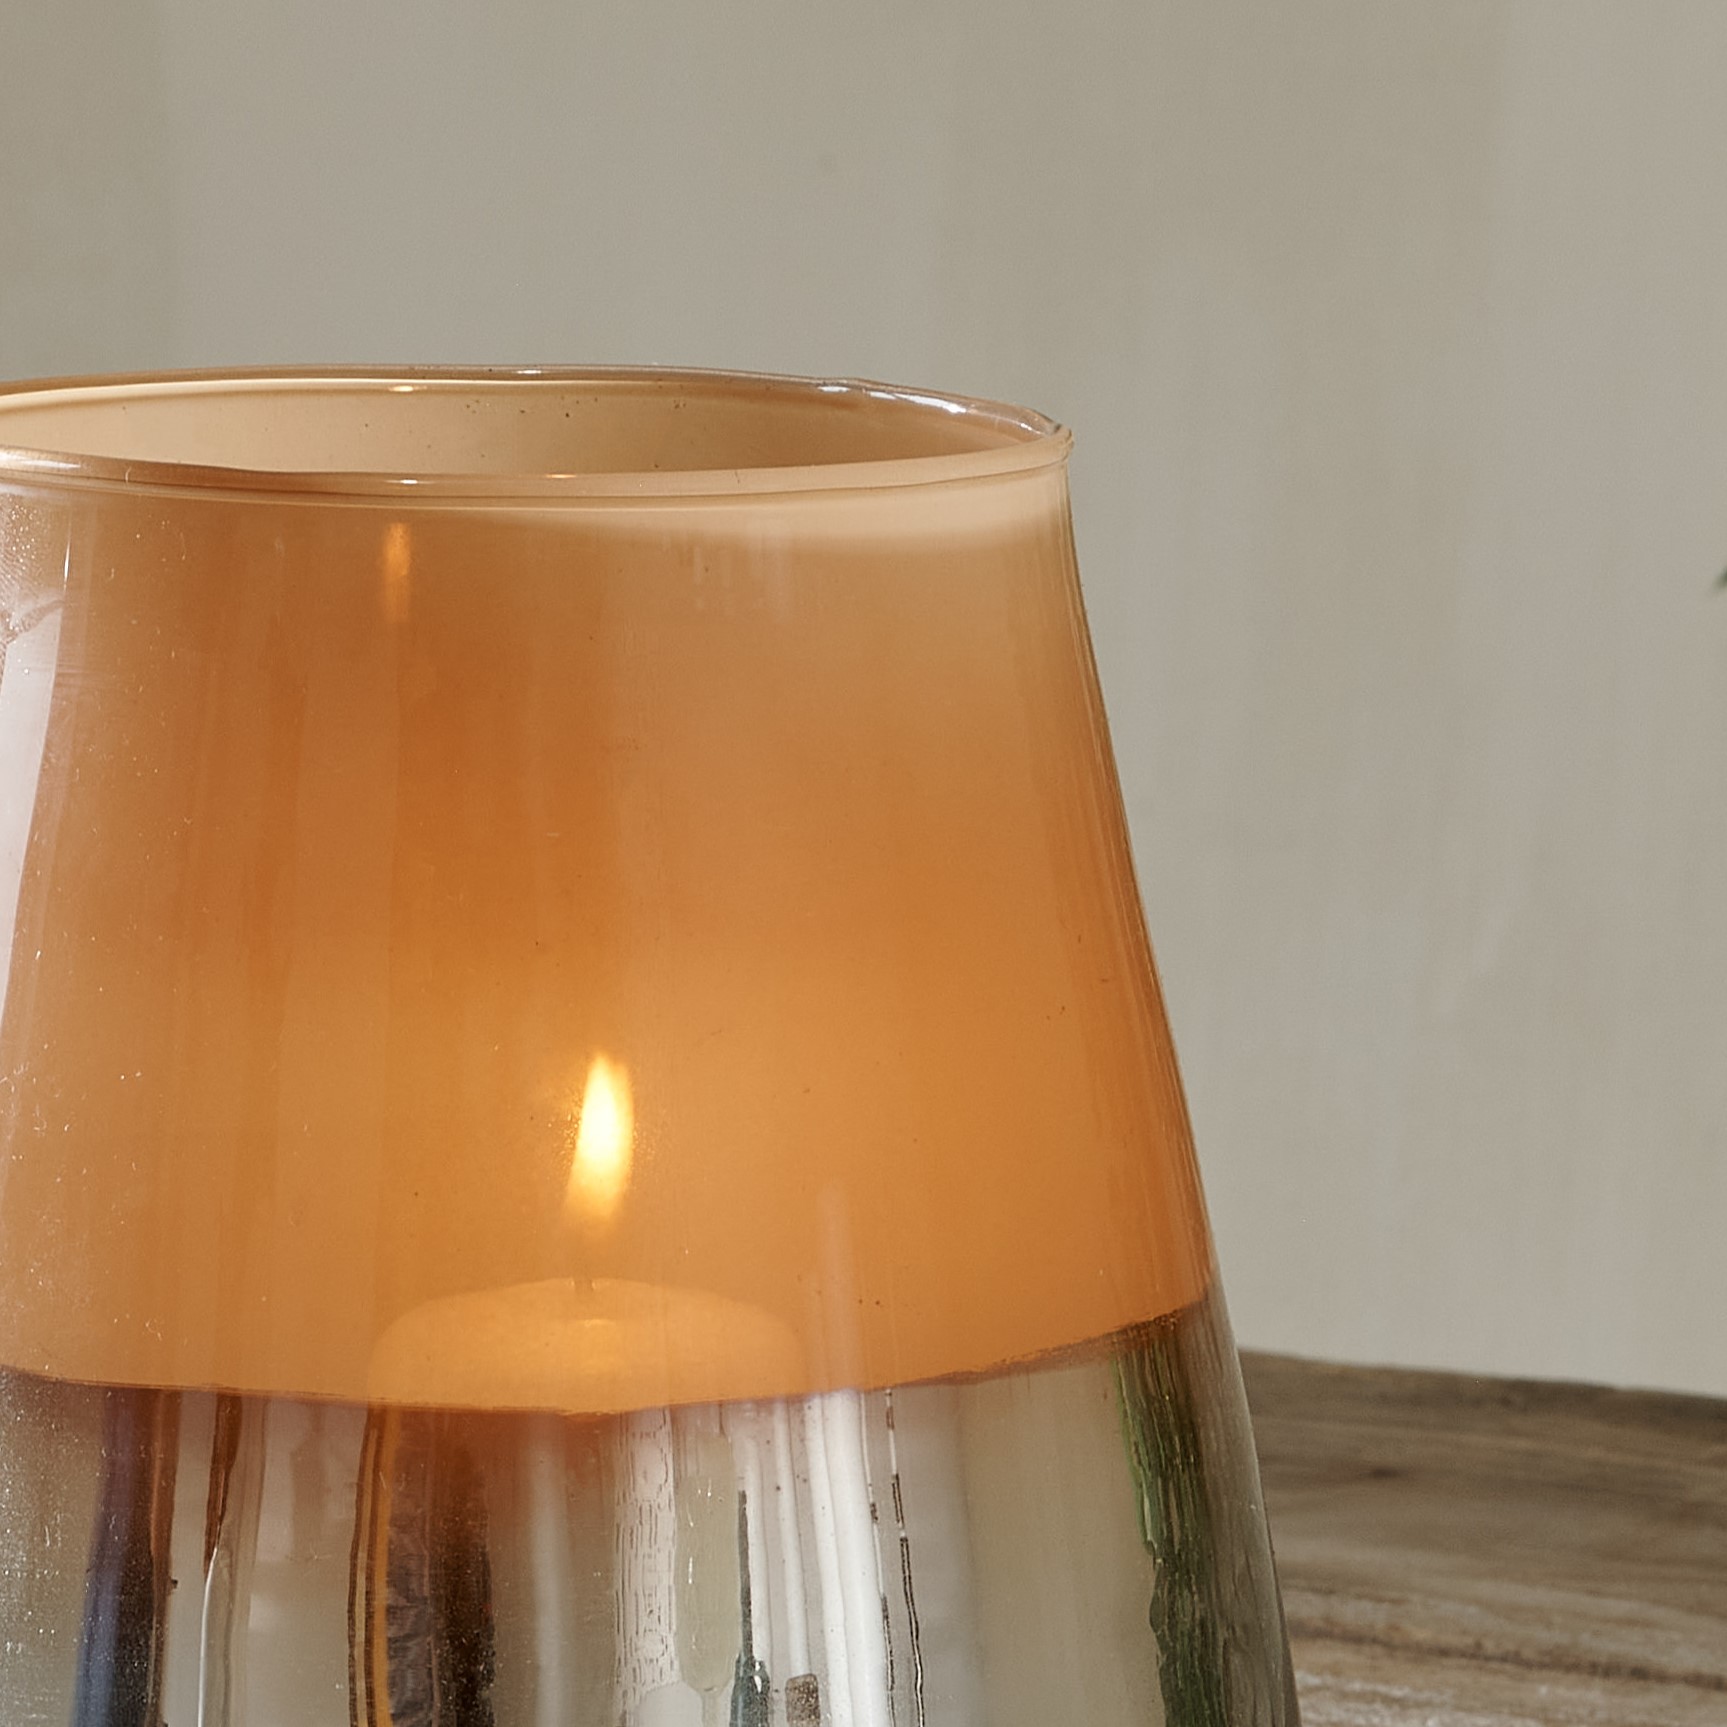 Top of metallic hurricane lantern on wooden table with candle